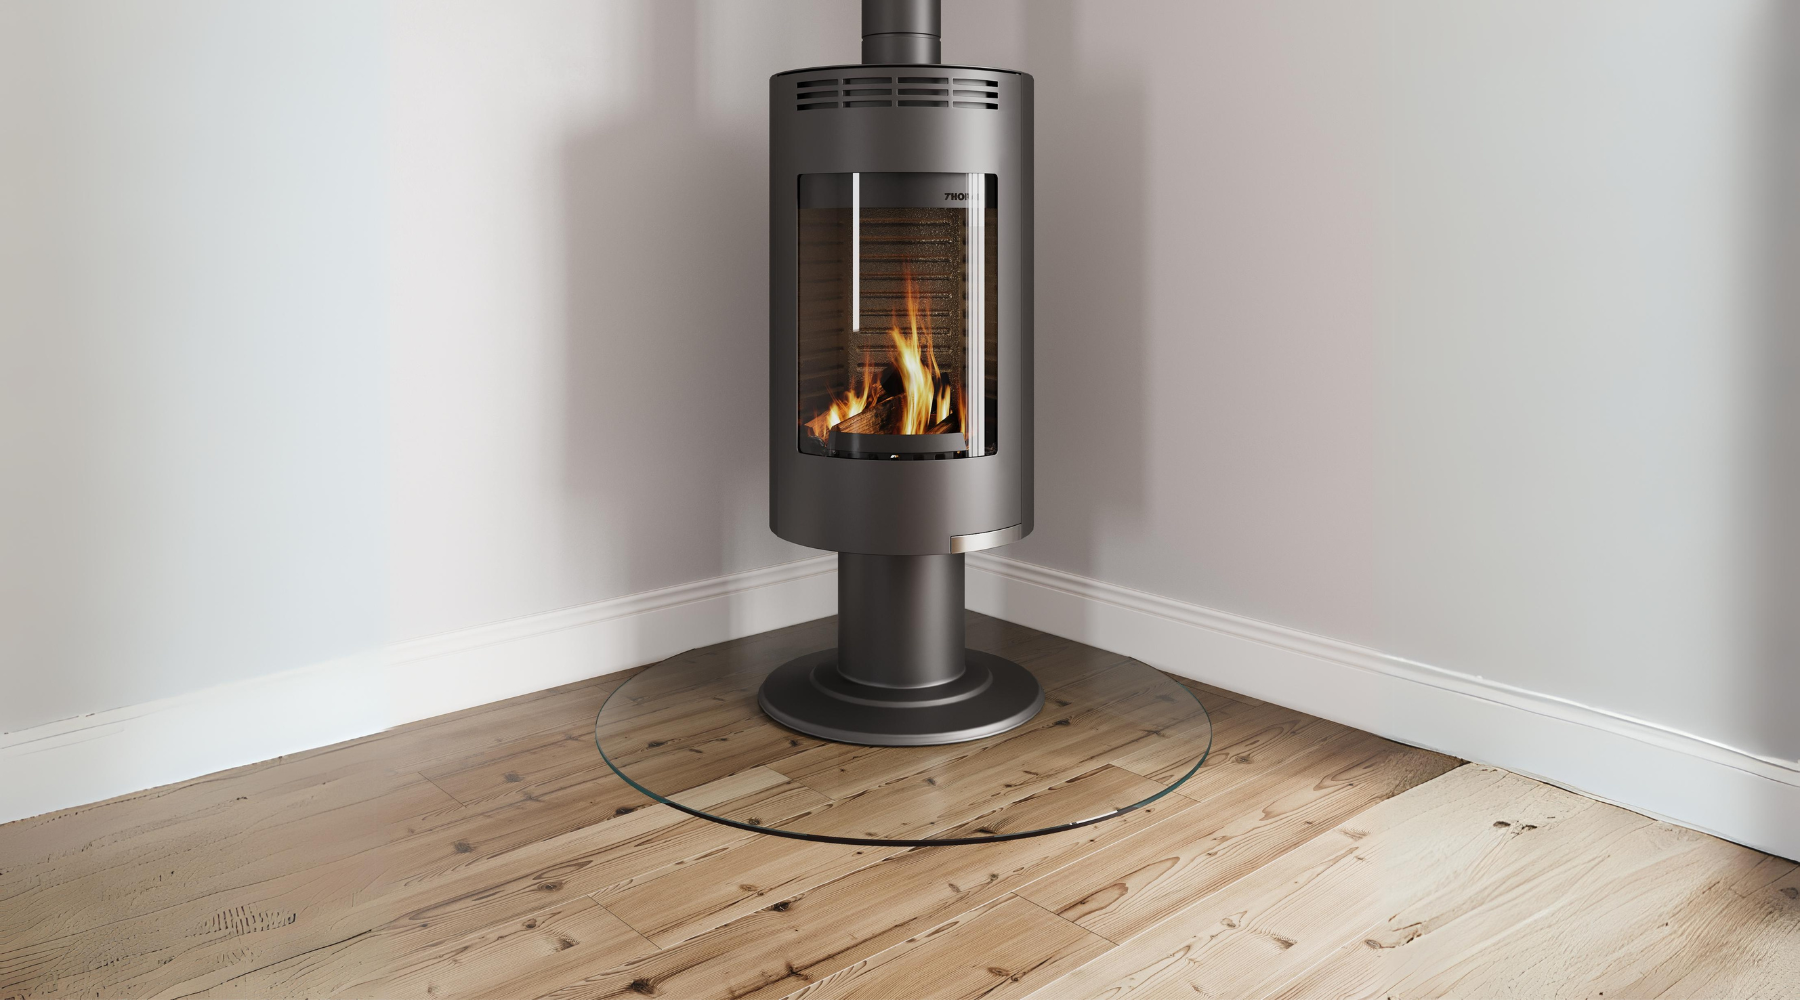 Free-standing wood burner with toughened glass hearth placed on a wood floor.